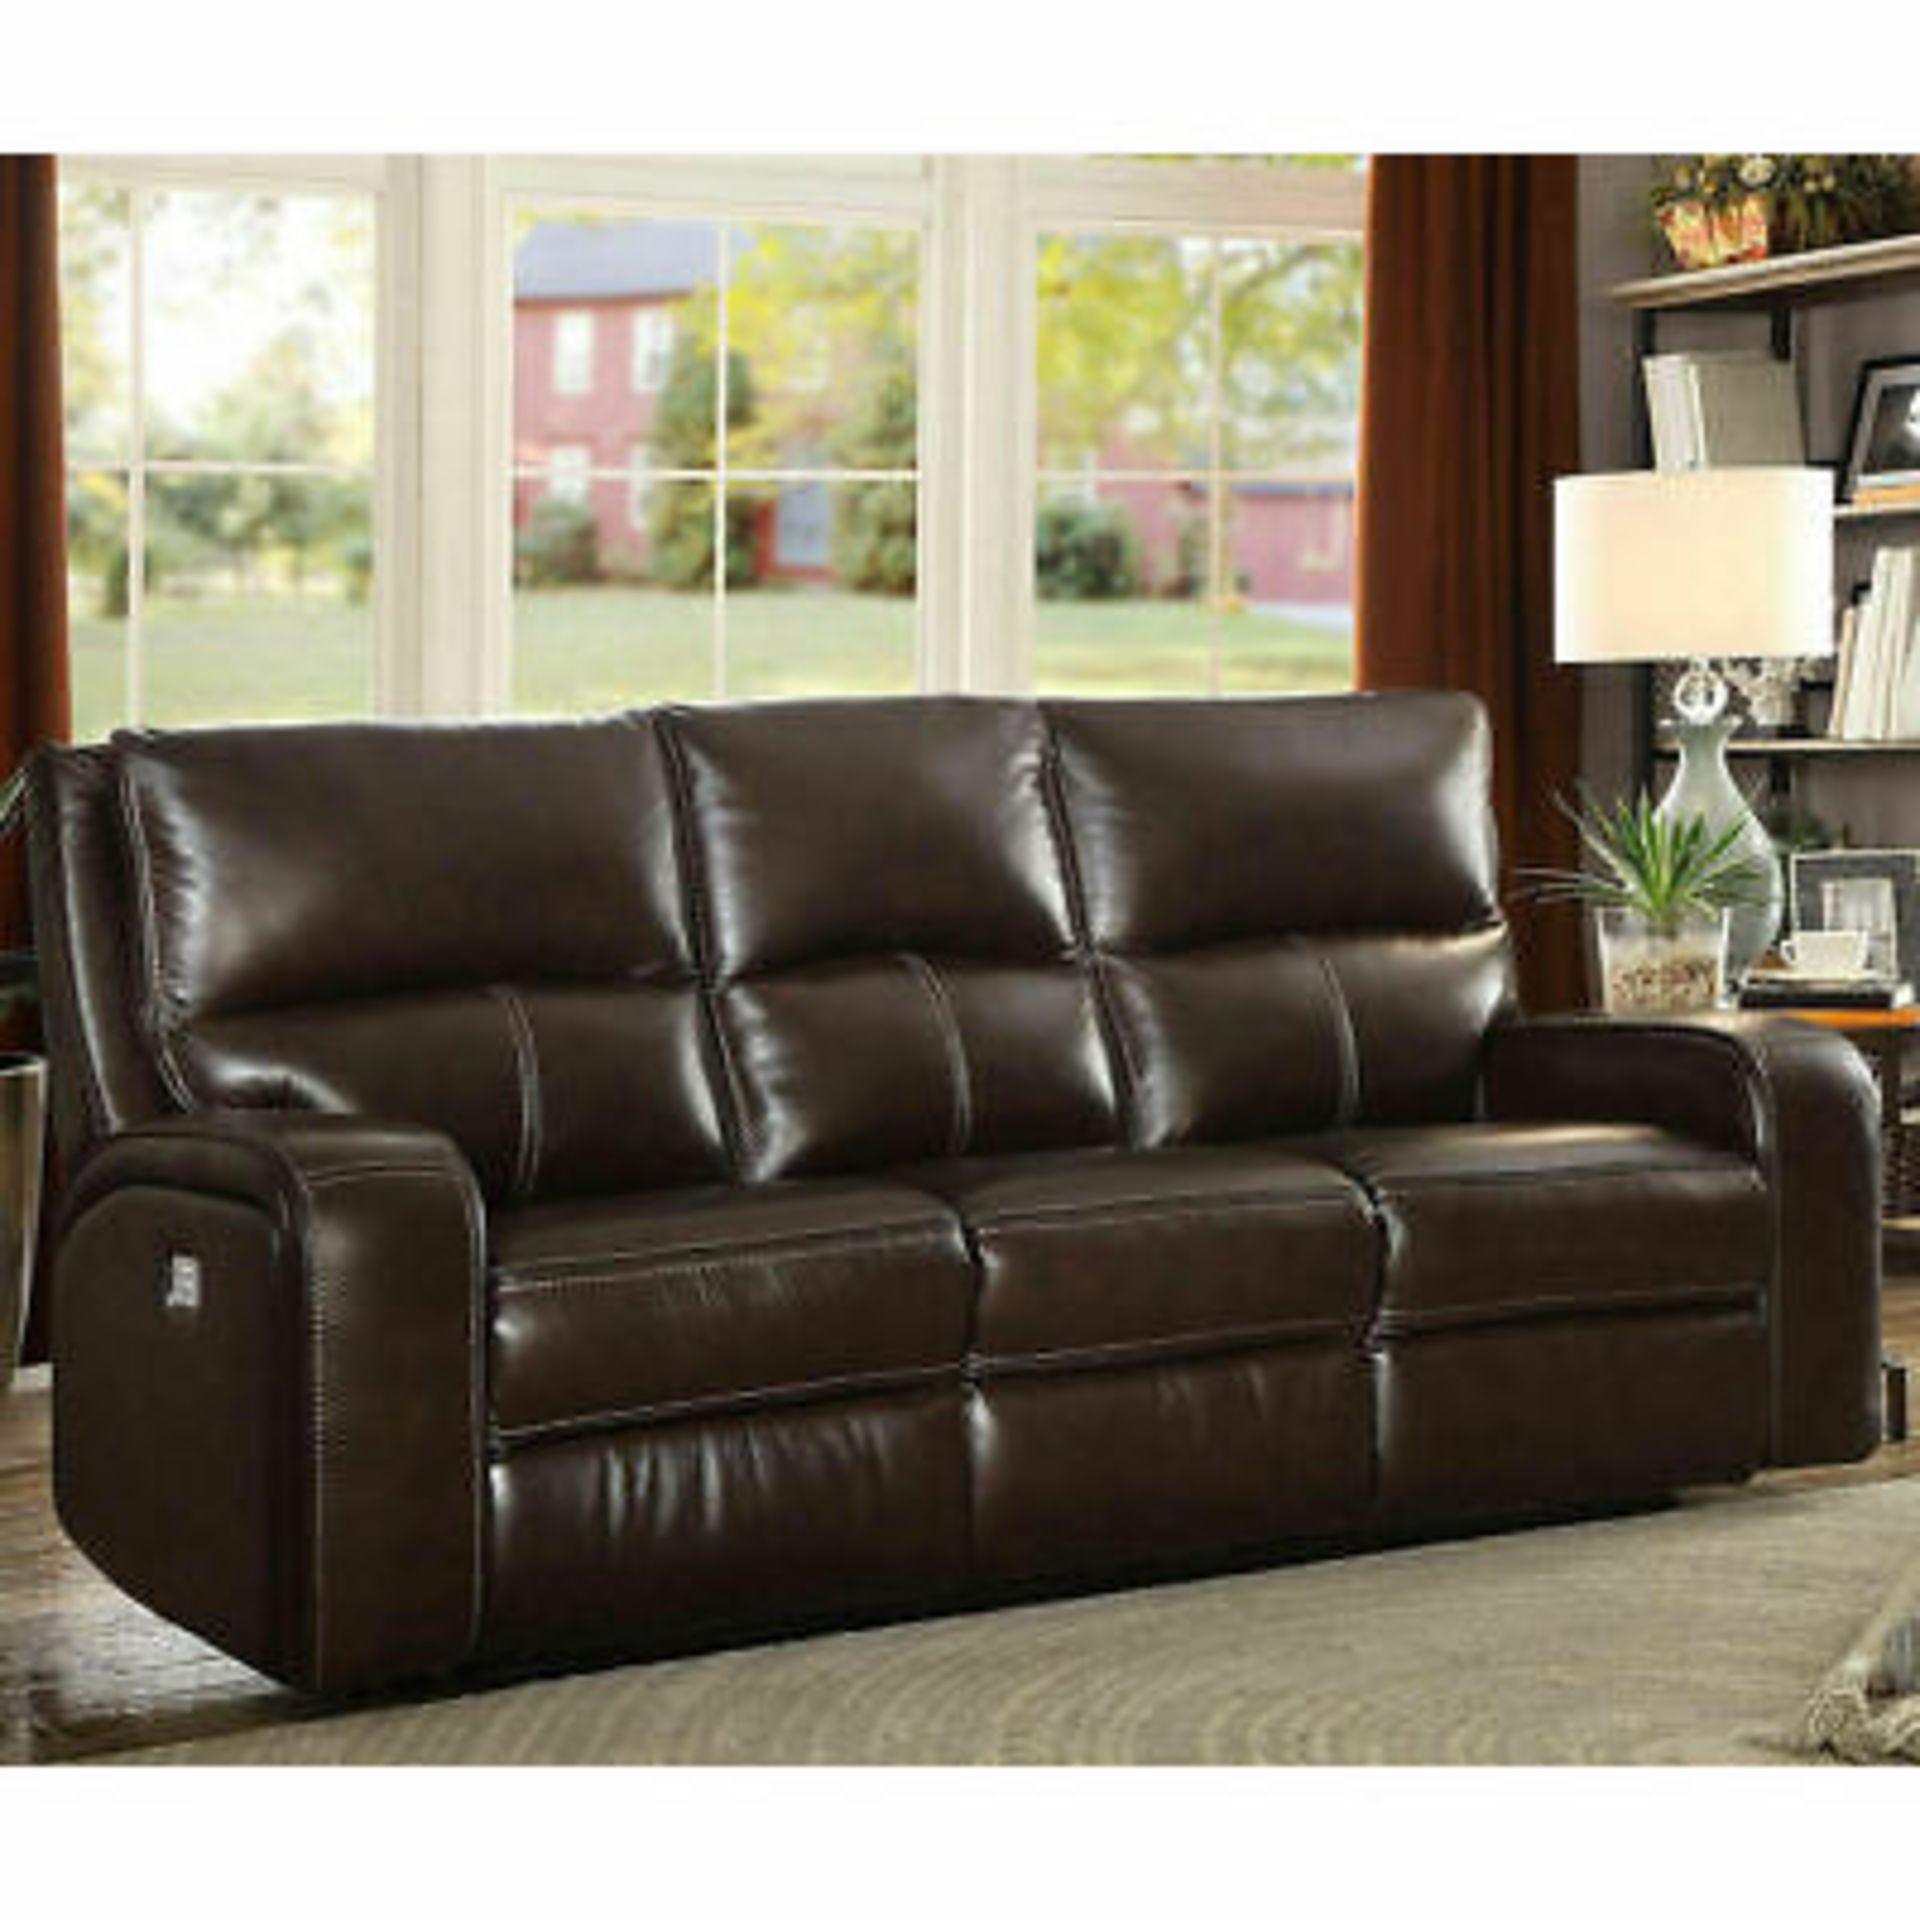 1 ZACH BROWN 3 SEATER LEATHER POWER RECLINER WITH USB PORT RRP Â£1099 (GENERIC IMAGE GUIDE)